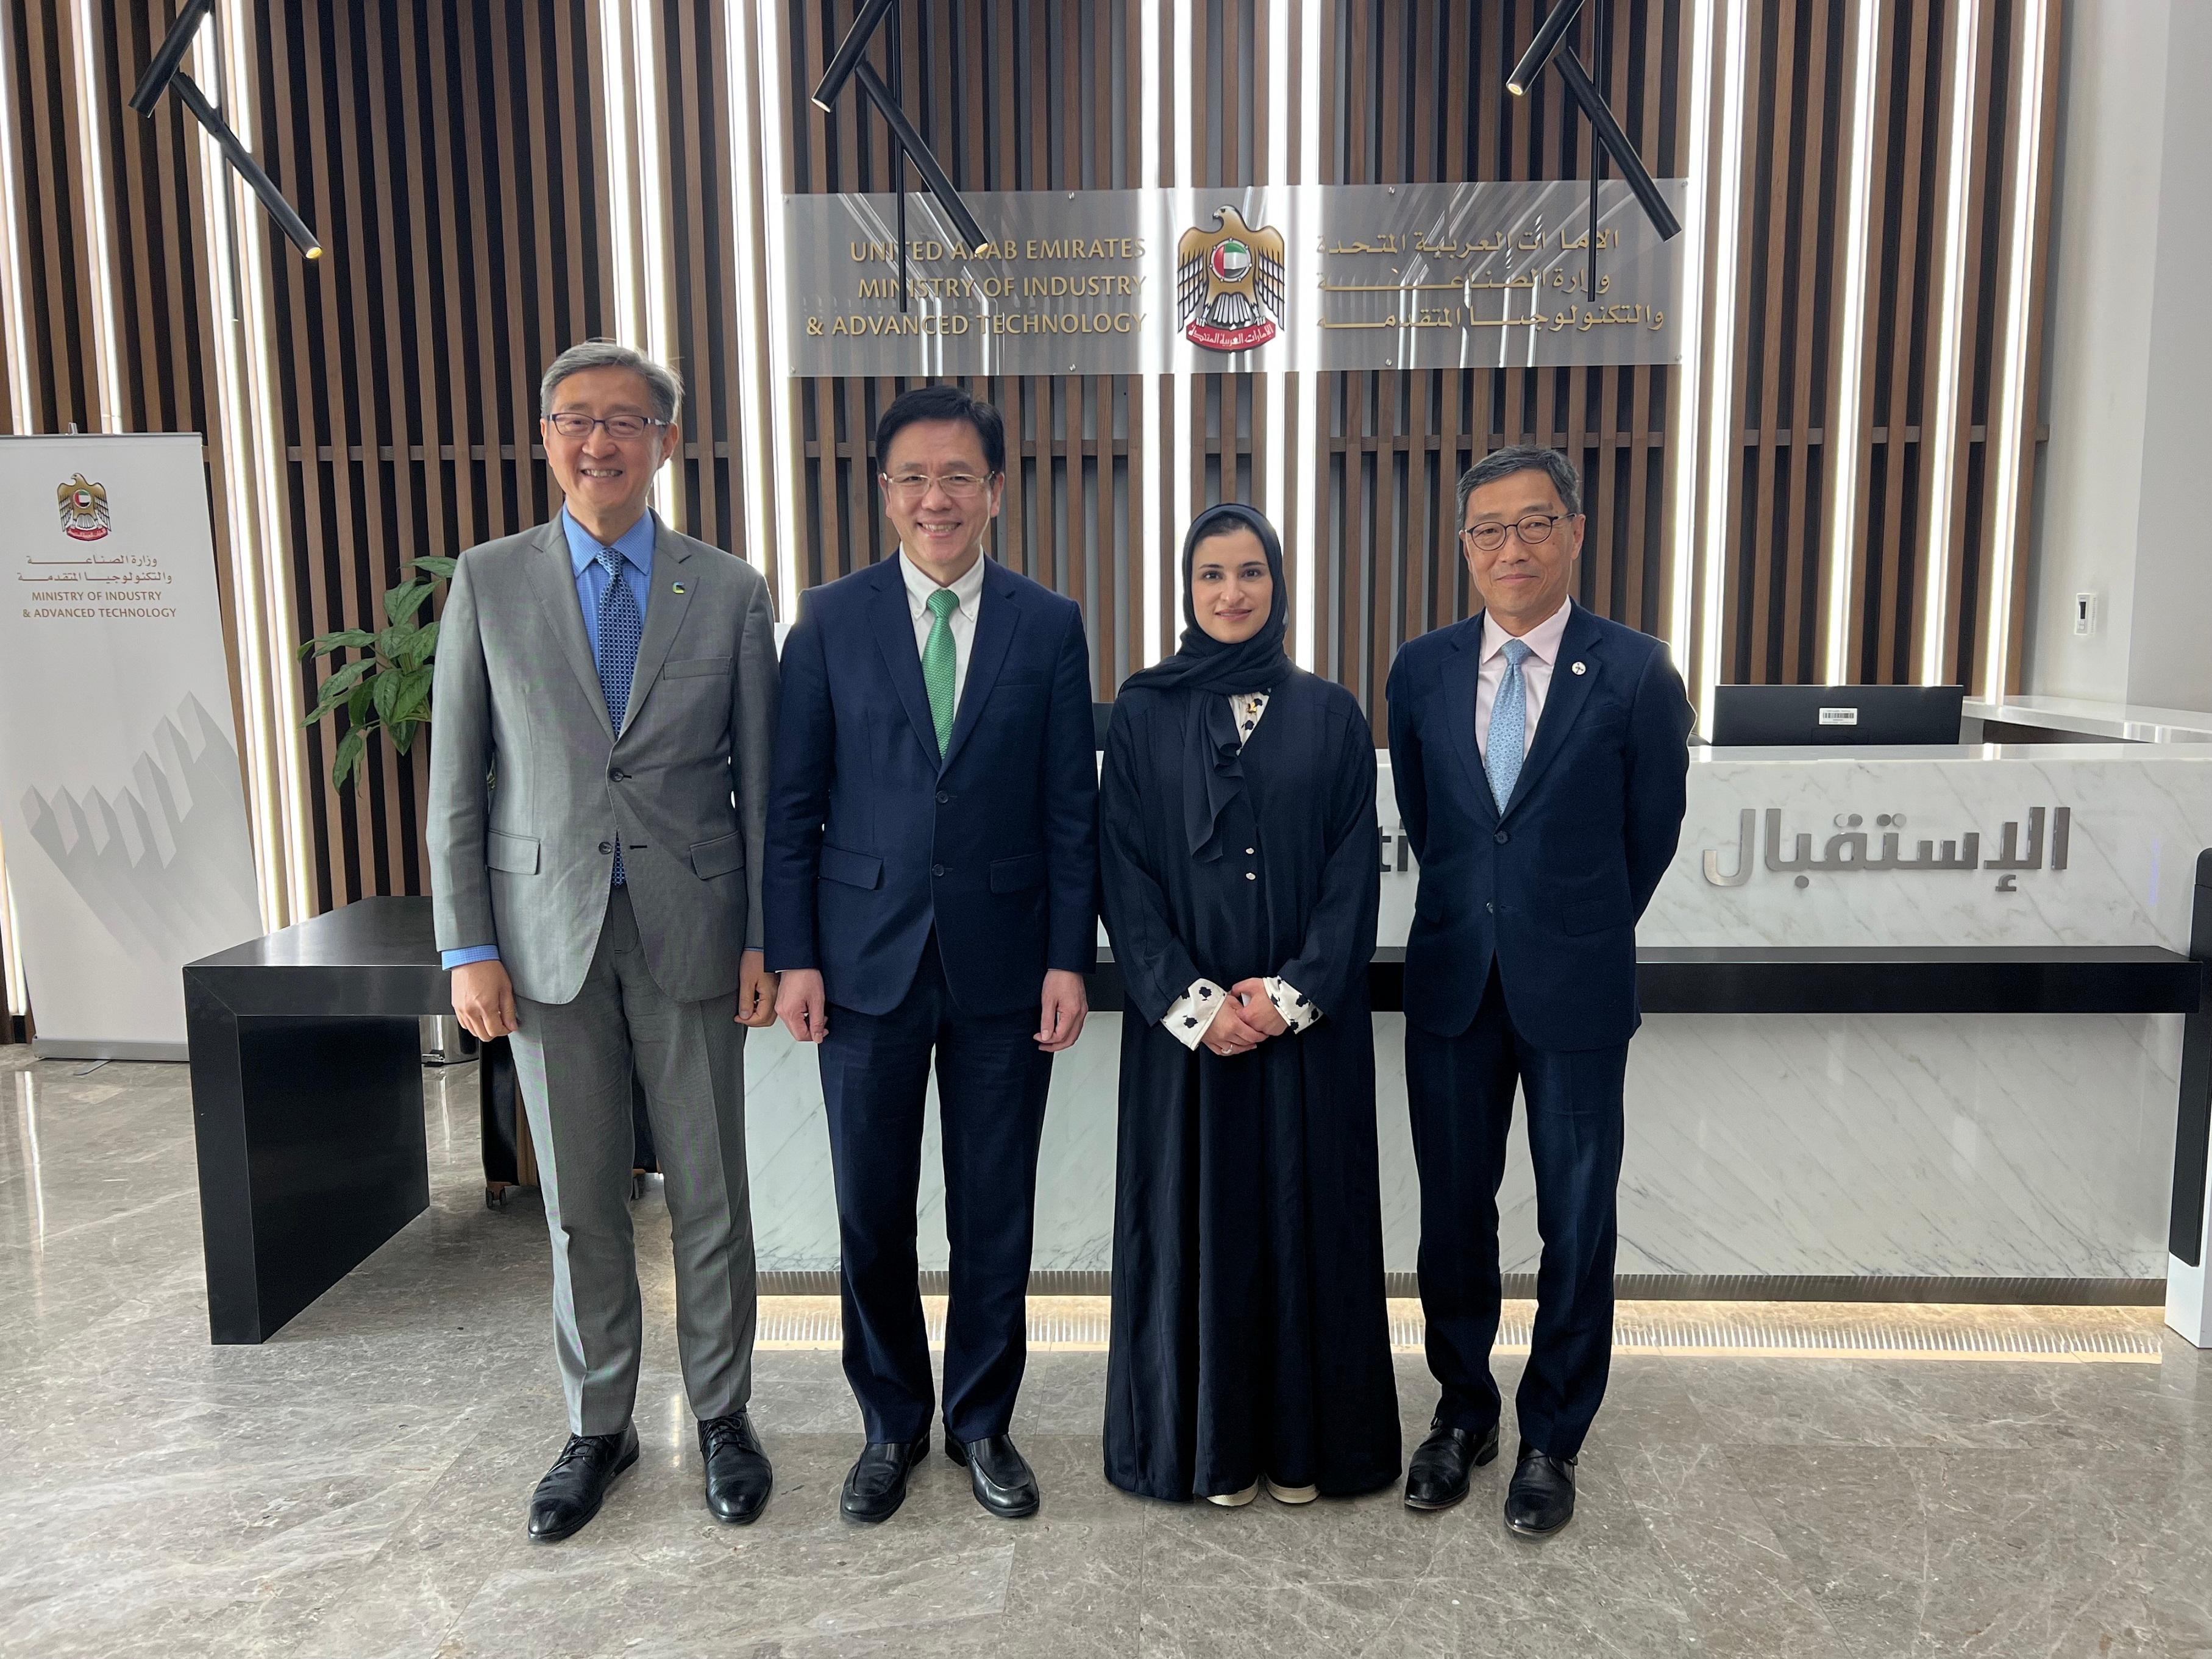 The Secretary for Innovation, Technology and Industry, Professor Sun Dong (second left), on March 6 (Dubai time) met with the Minister of State for Advanced Technology of the United Arab Emirates, Ms Sarah bint Yousif Al Amiri (second right), and both sides expressed their willingness to strengthen co-operation in innovation and technology and new industrialisation between the two places. Looking on are the Chief Executive Officer of the Hong Kong Science and Technology Parks Corporation, Mr Albert Wong (first right); and the Chief Executive Officer of the Hong Kong Cyberport Management Company Limited, Mr Peter Yan (first left).

